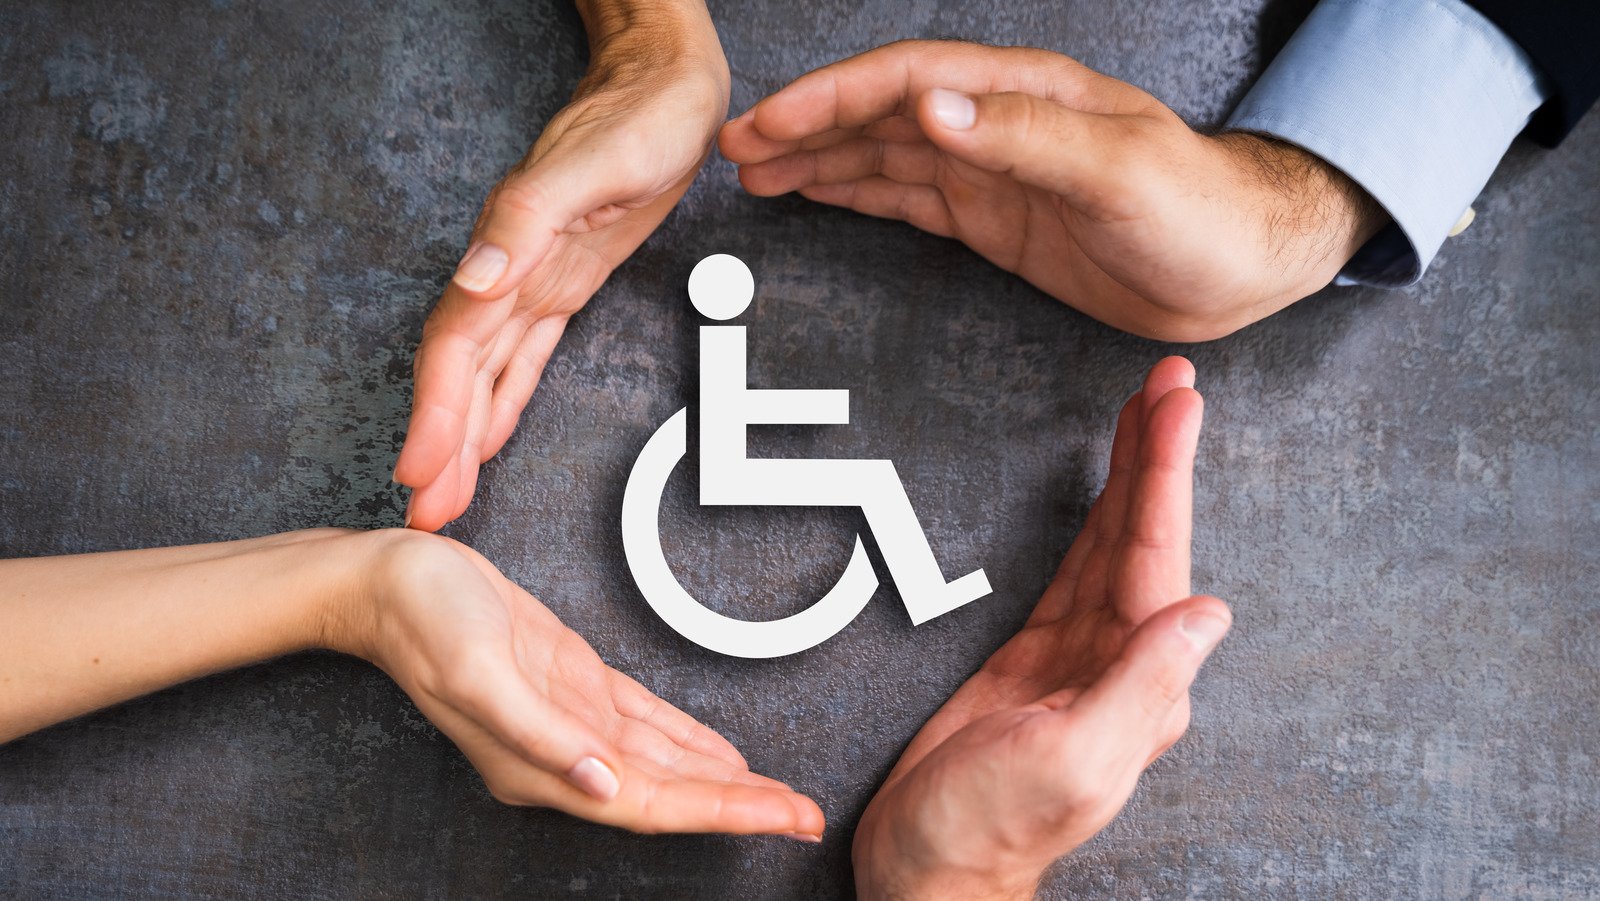 Easy Ways To Increase The Accessibility Of Your Home For People With Disabilities - House Digest